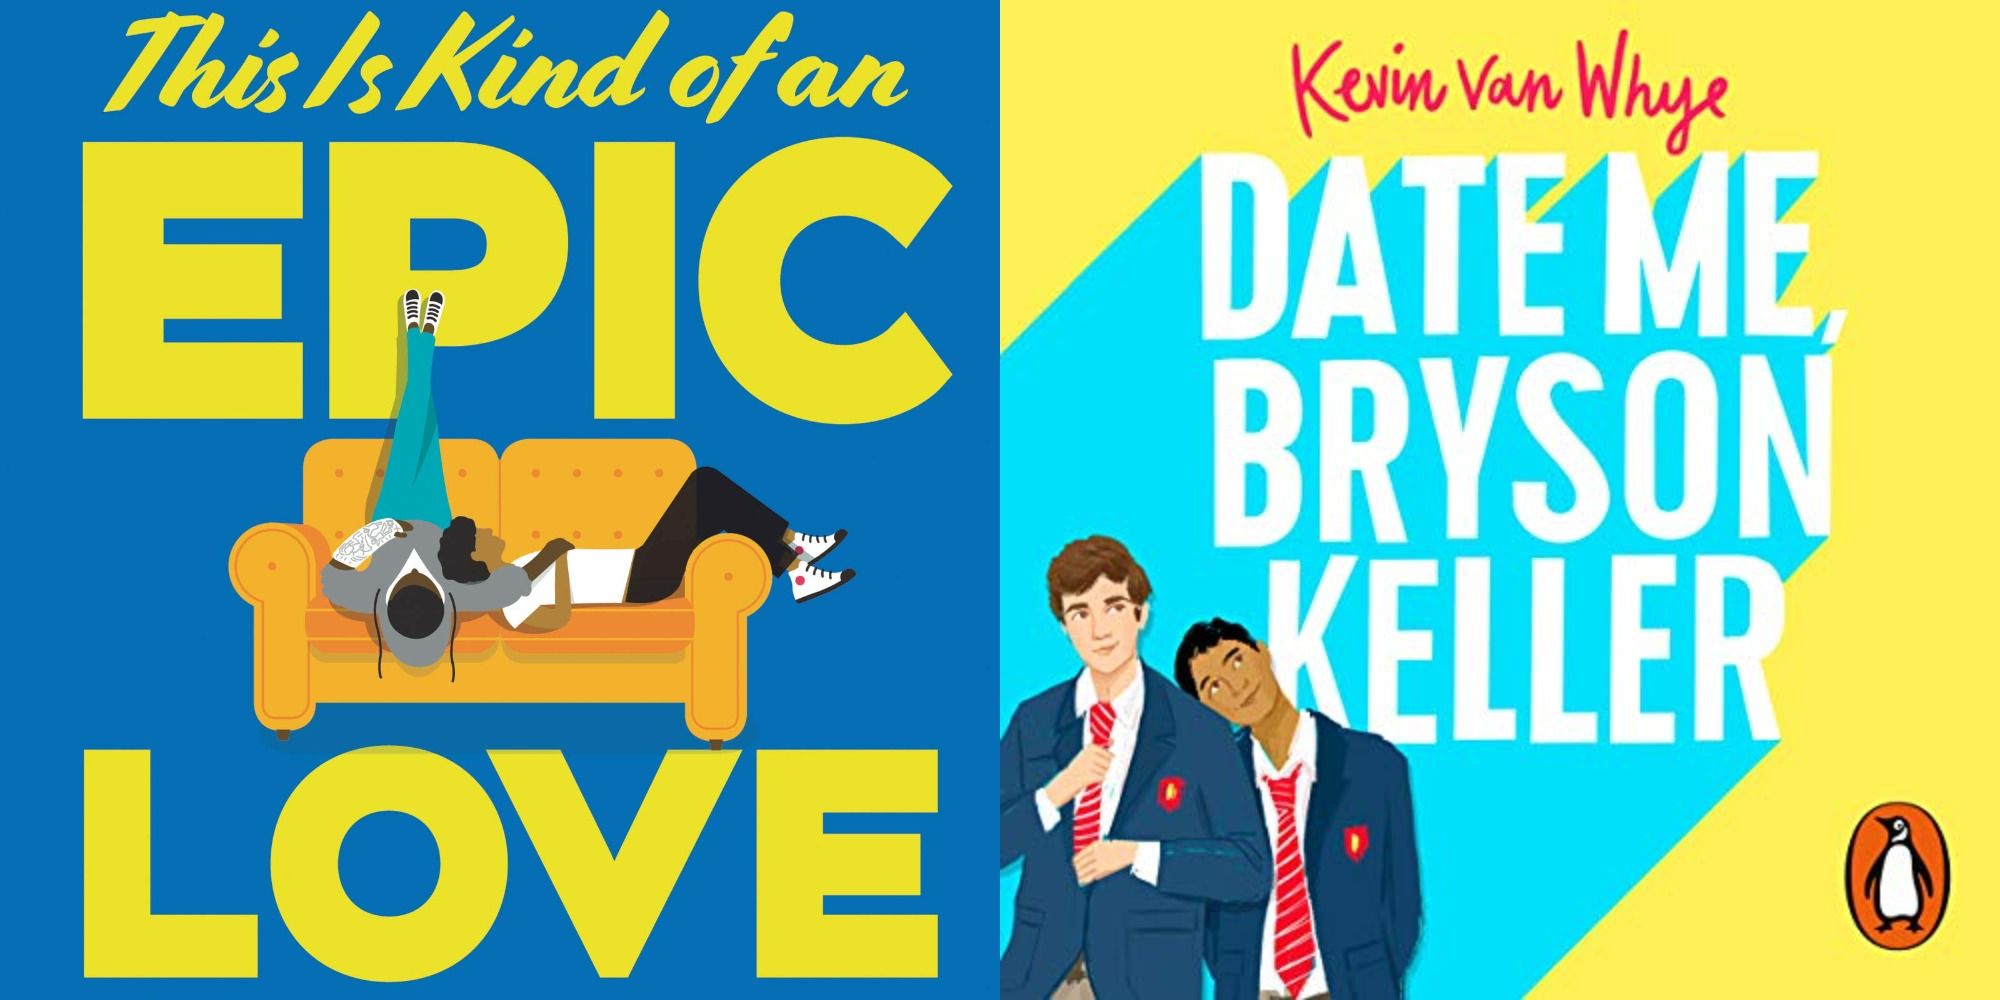 Split image showing the covers to This Is Kind of an Epic Love Story and Date me Bryson Keller